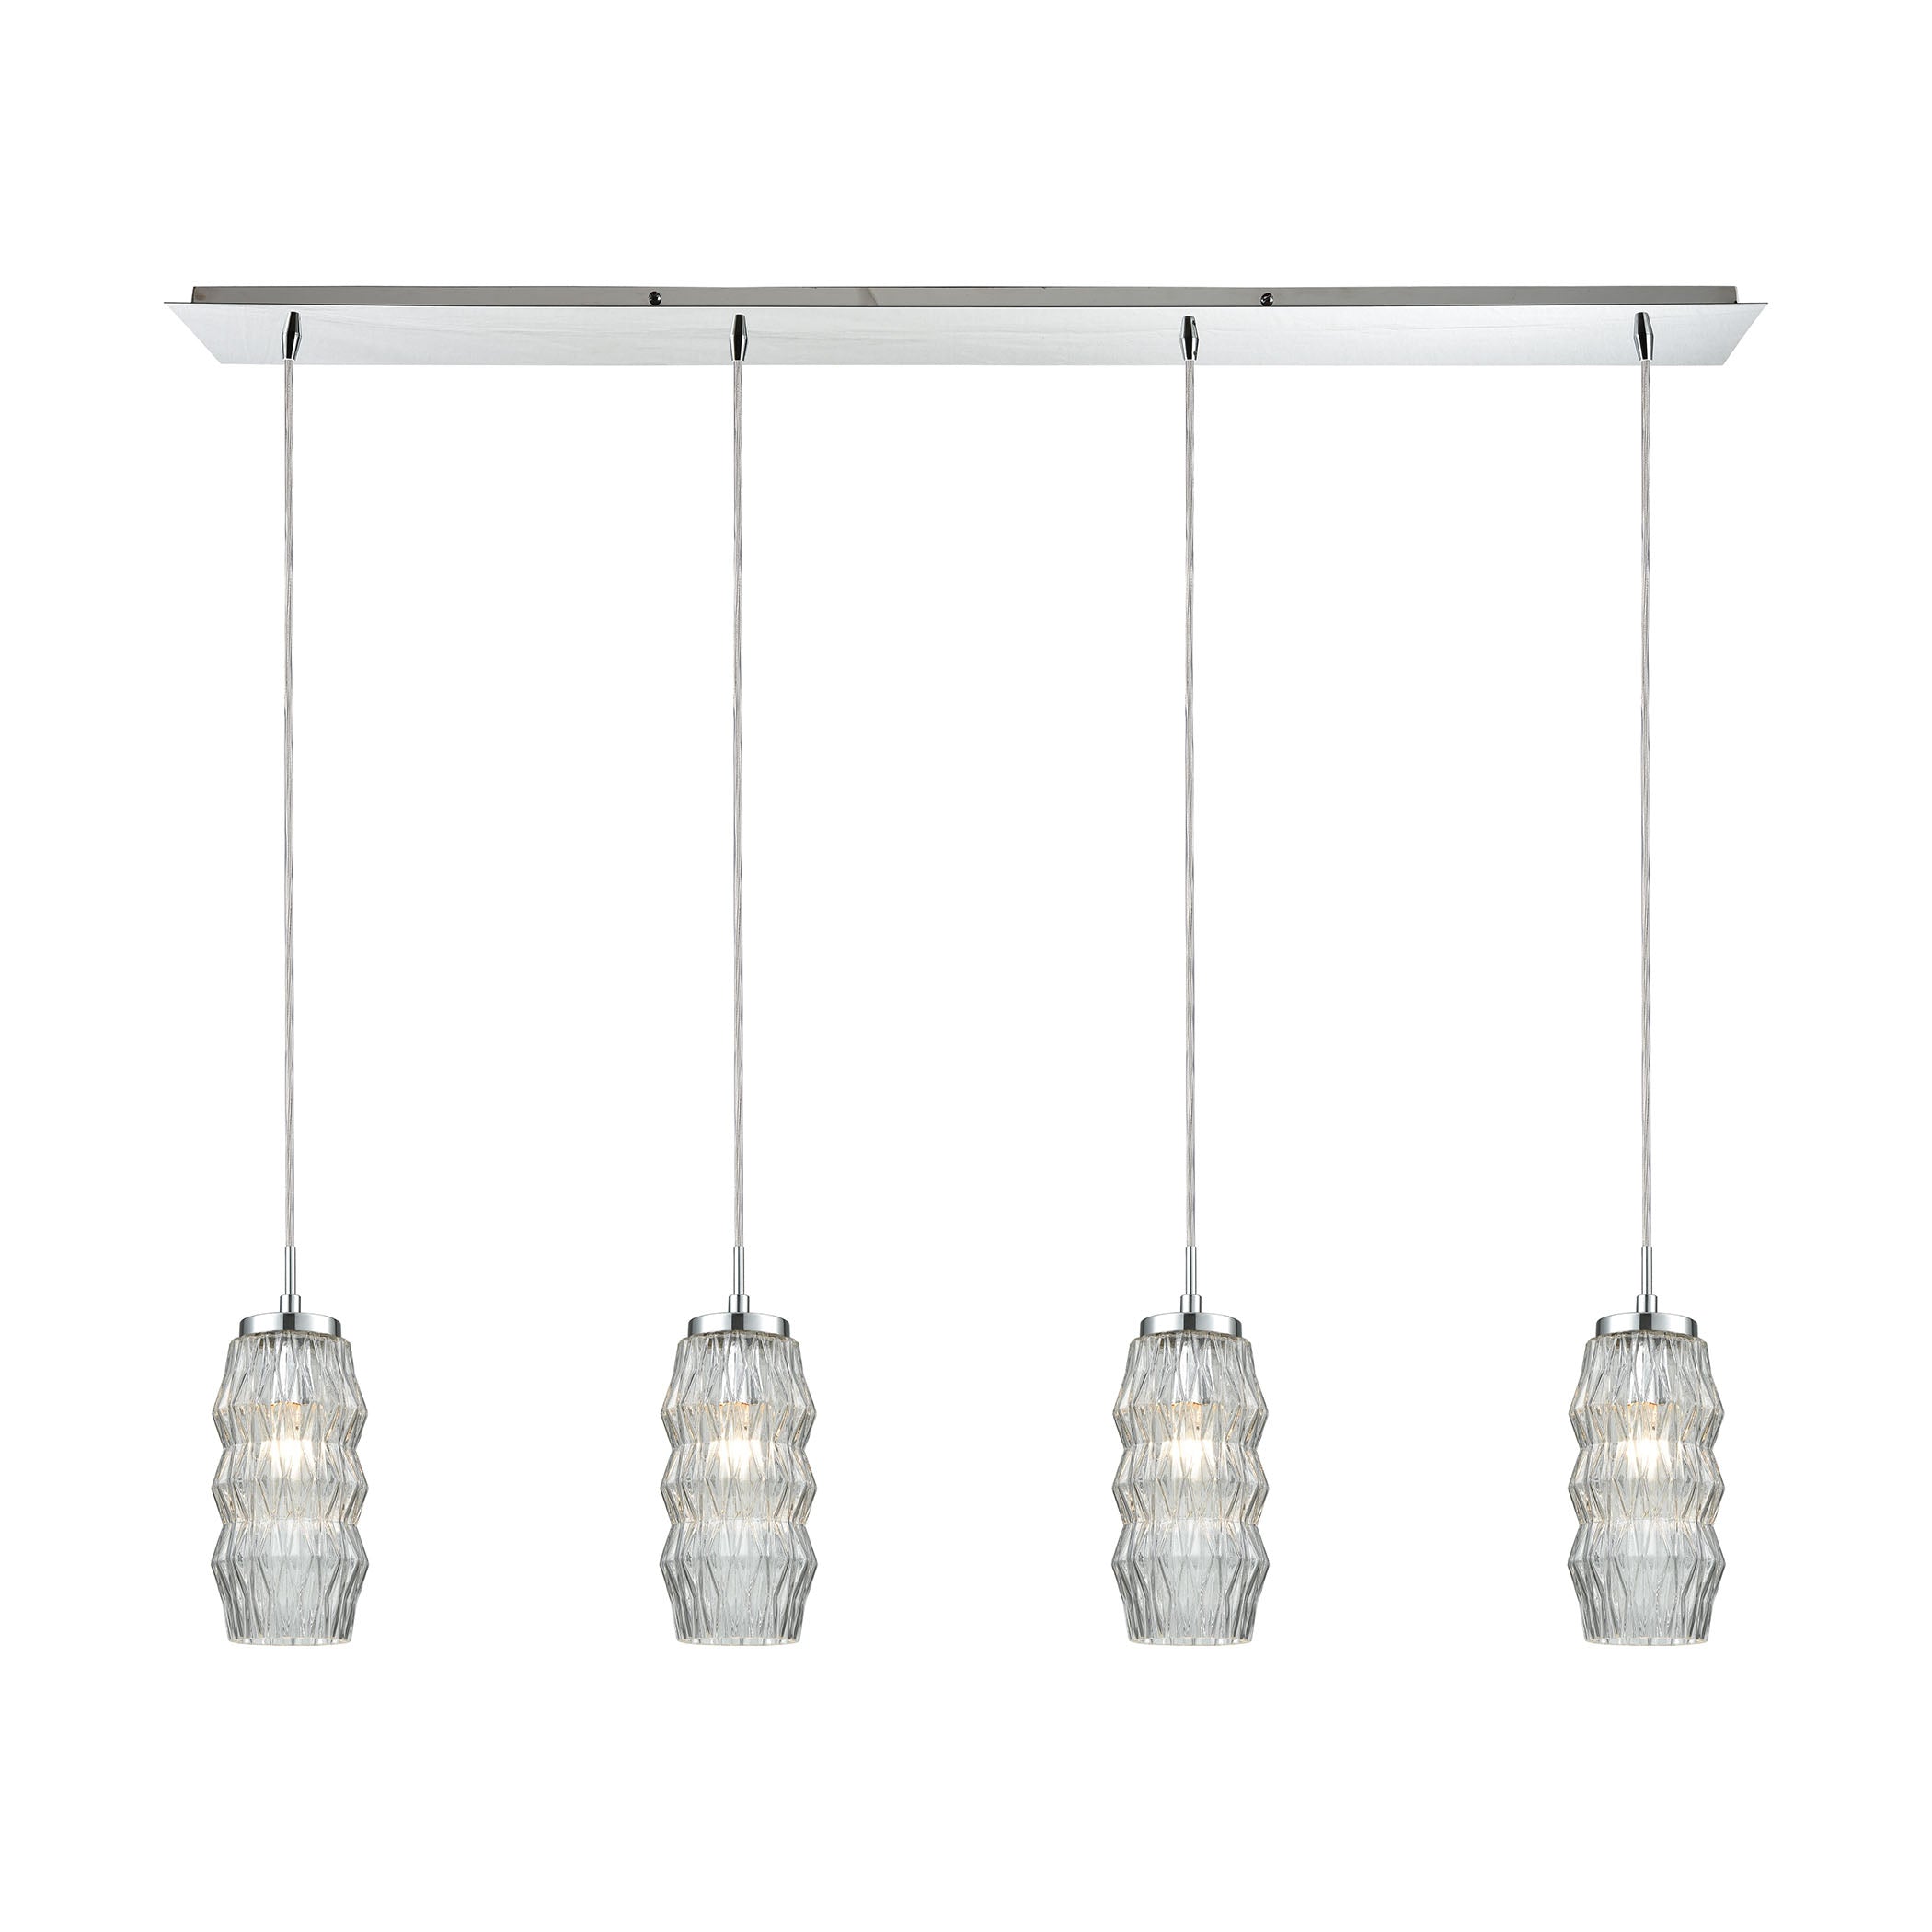 ELK Lighting 56650/4LP Zigzag 4-Light Linear Pendant Fixture in Polished Chrome with Clear Patterned Glass